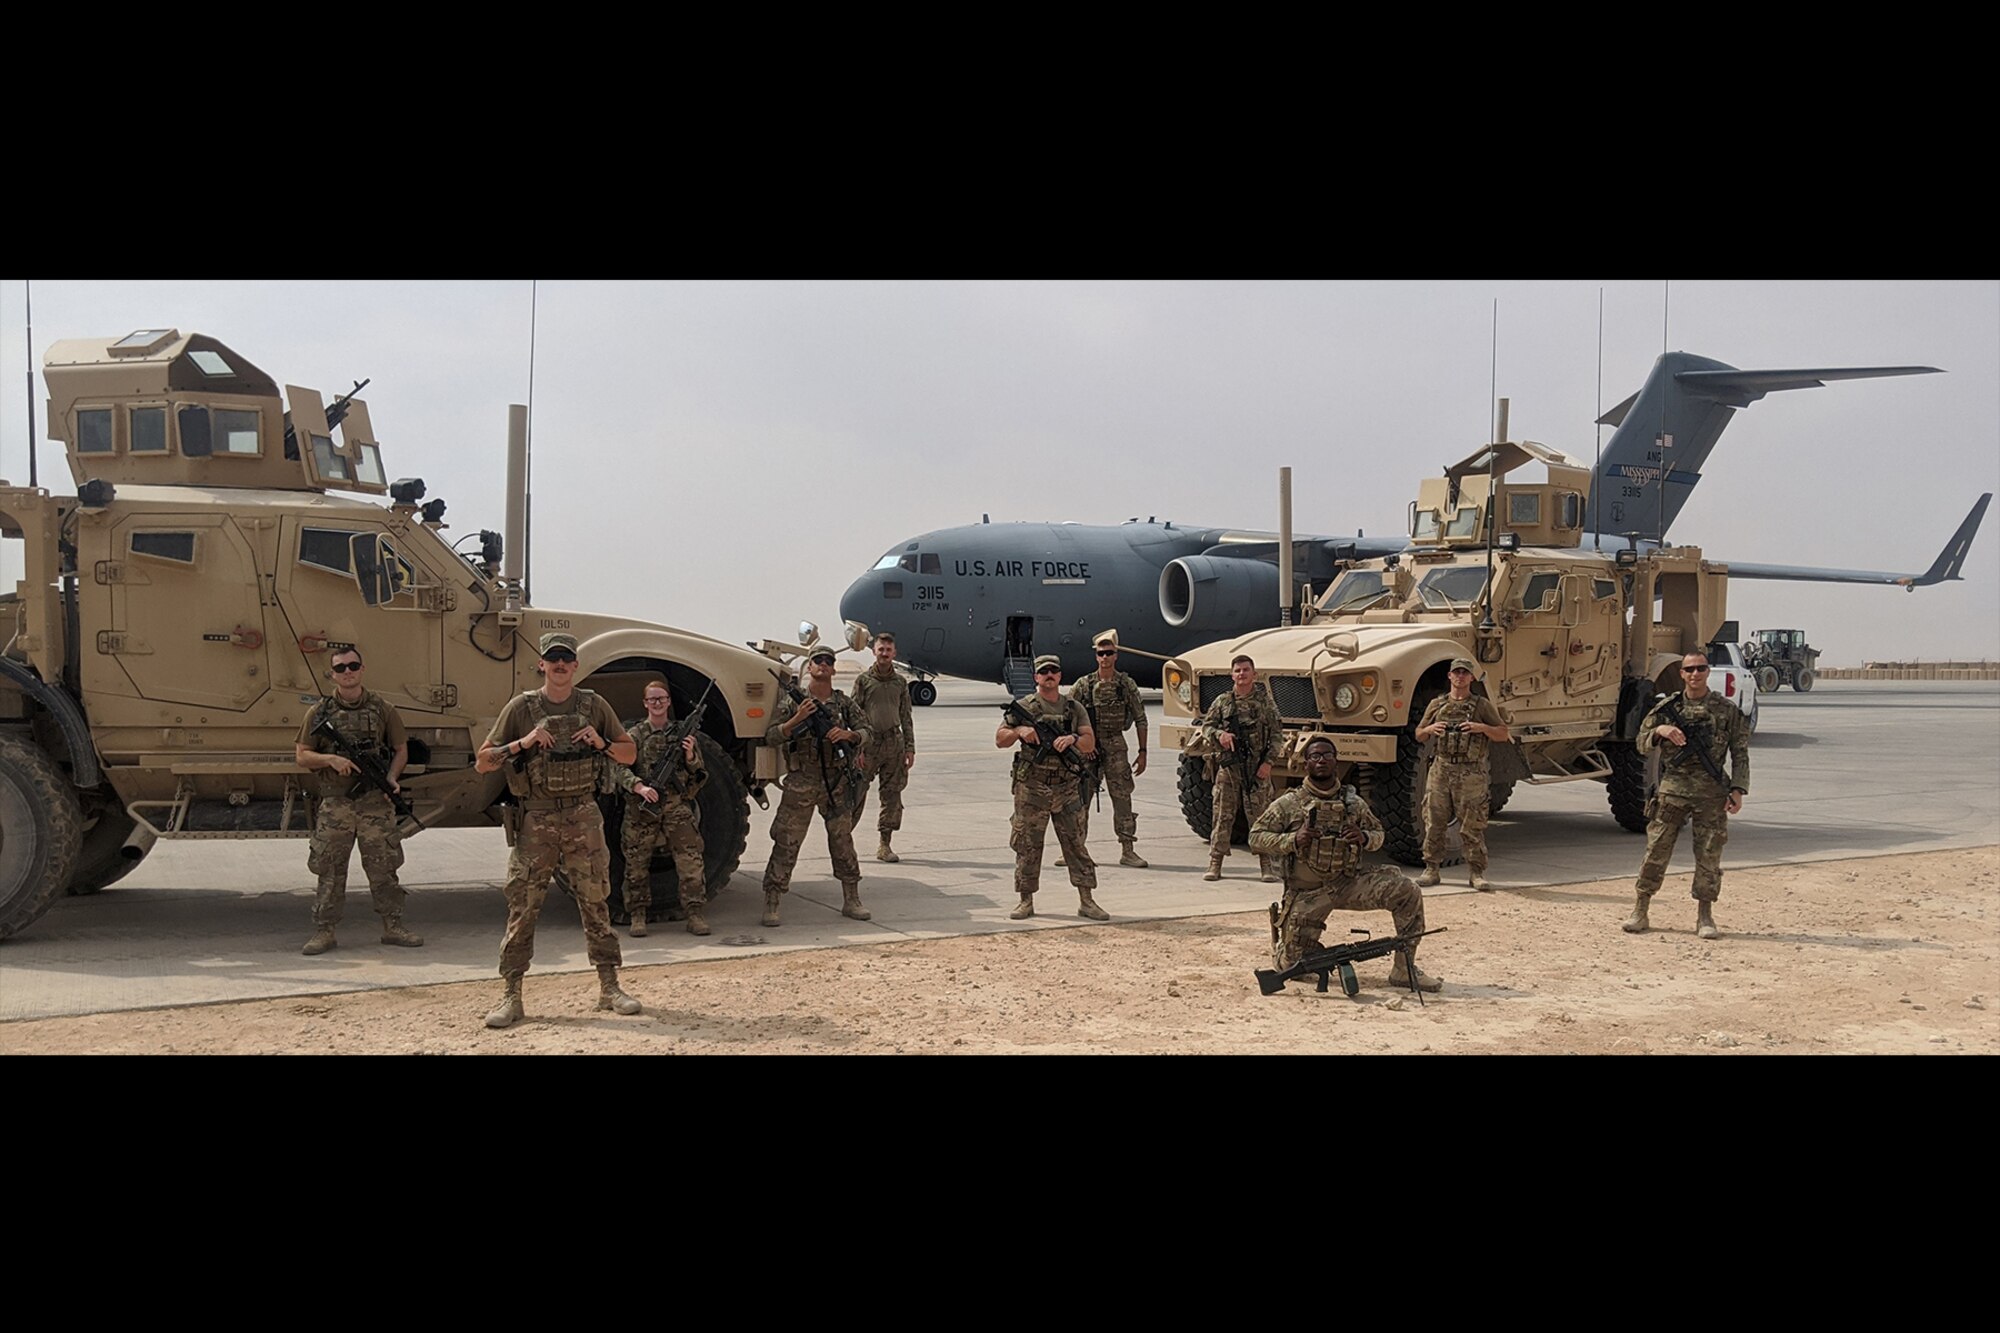 Photo shows military members standing in front of two humvees and a C-17 aircraft in the desert.